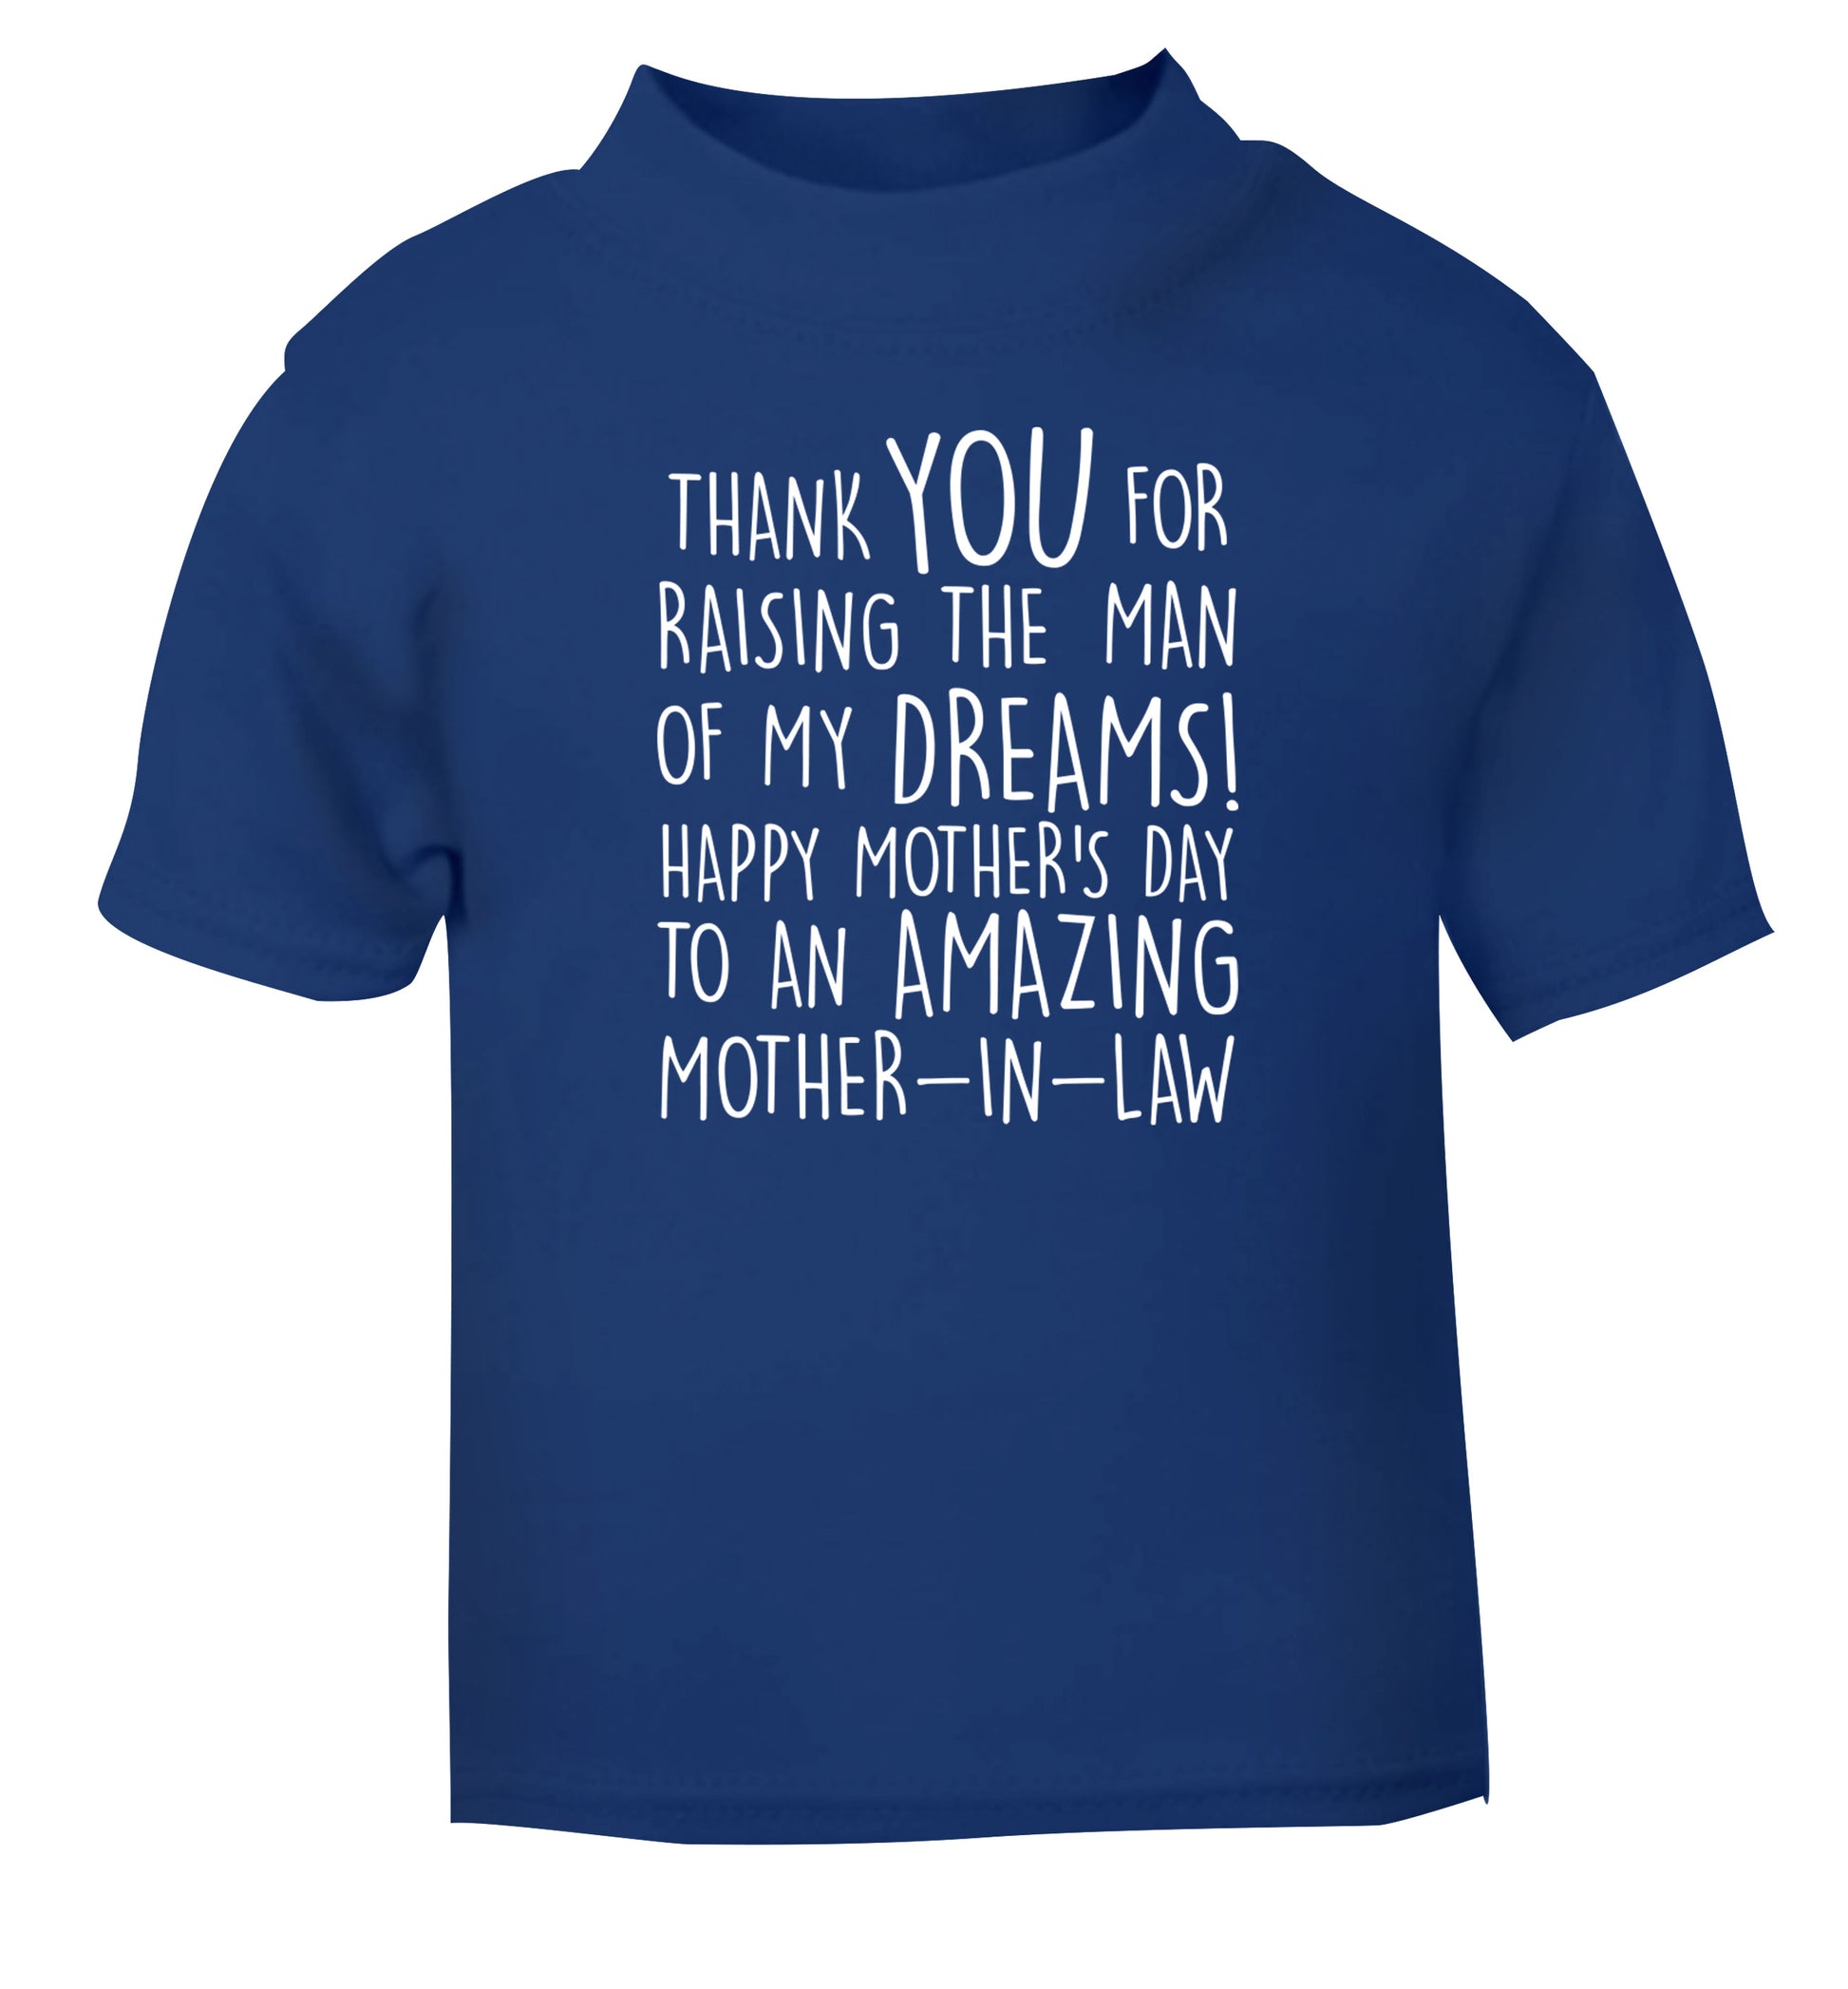 Thank you for raising the man of my dreams happy mother's day mother-in-law blue Baby Toddler Tshirt 2 Years